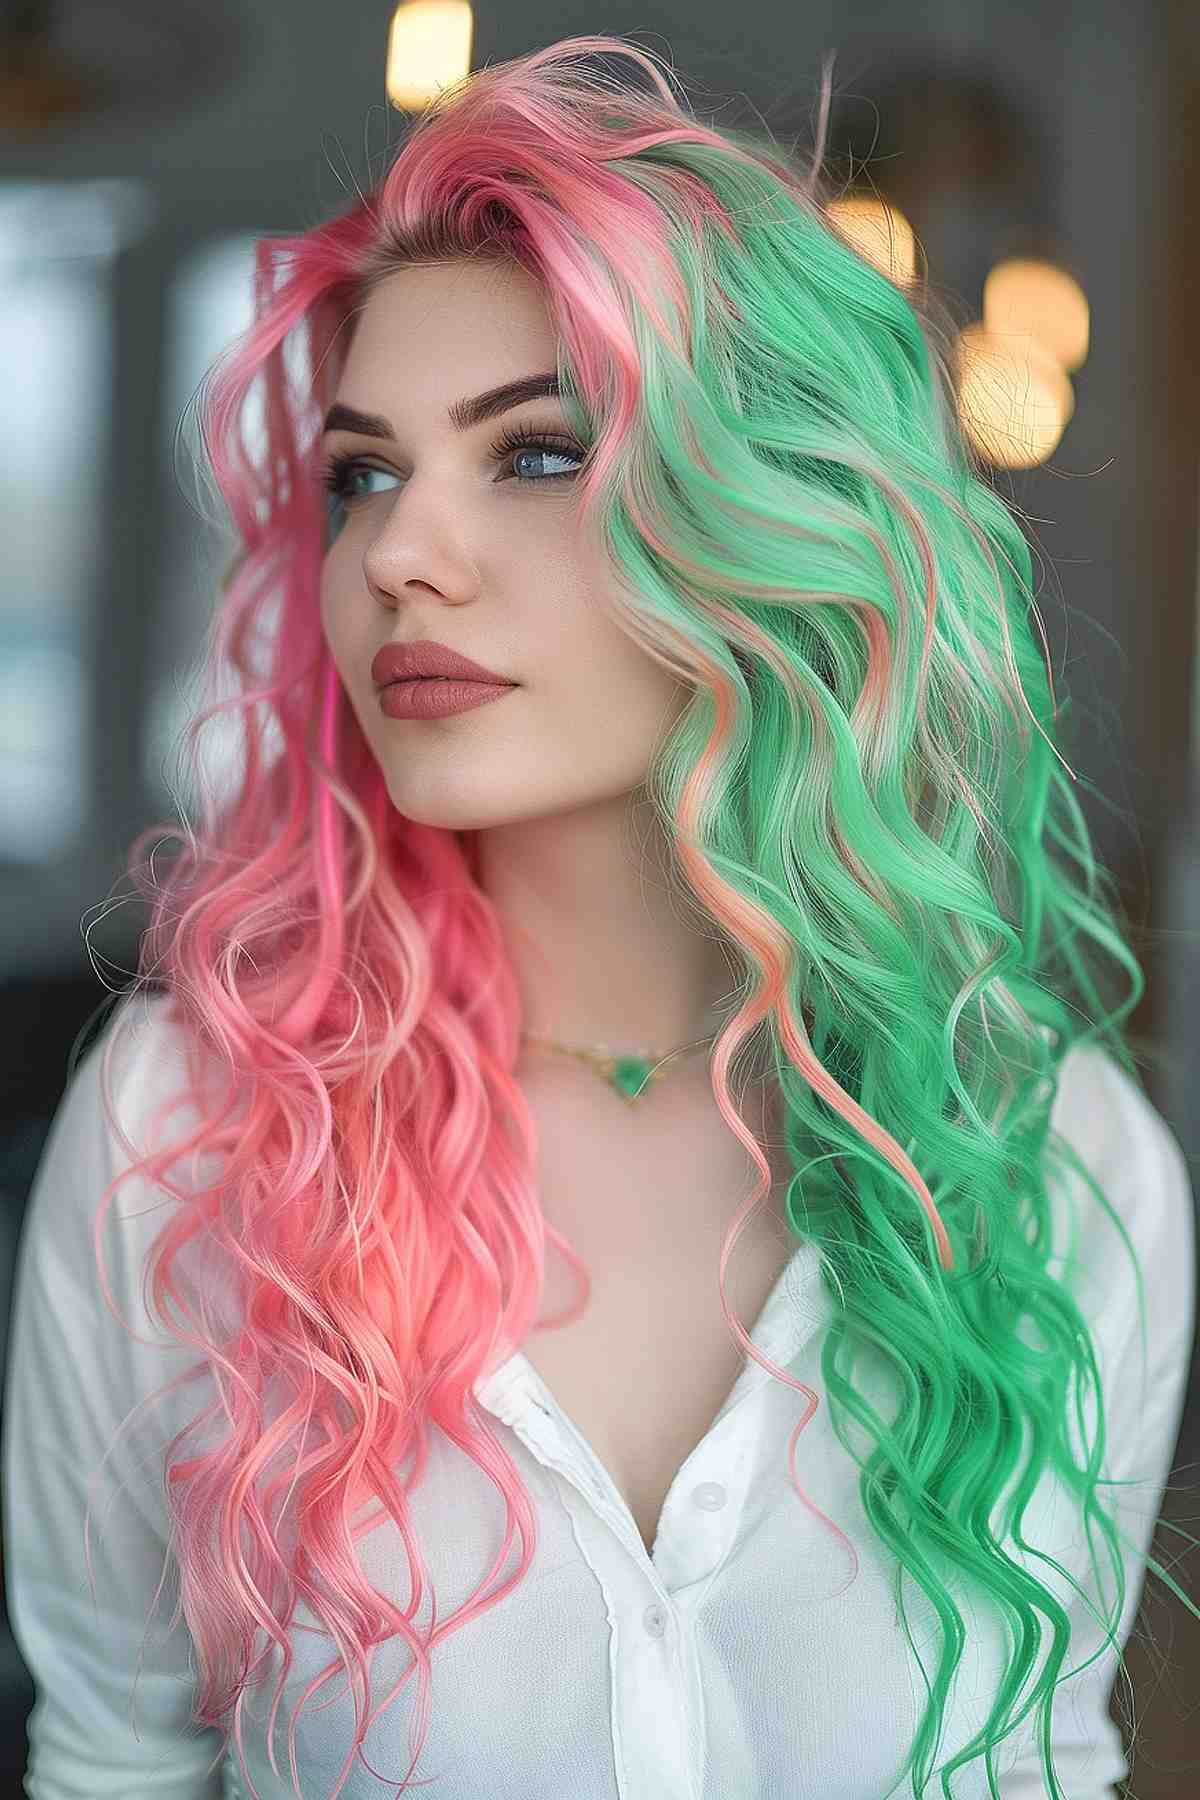 A woman with long, voluminous hair styled in waves, colored in a gradient from vibrant pink at the roots to seafoam green at the ends. 